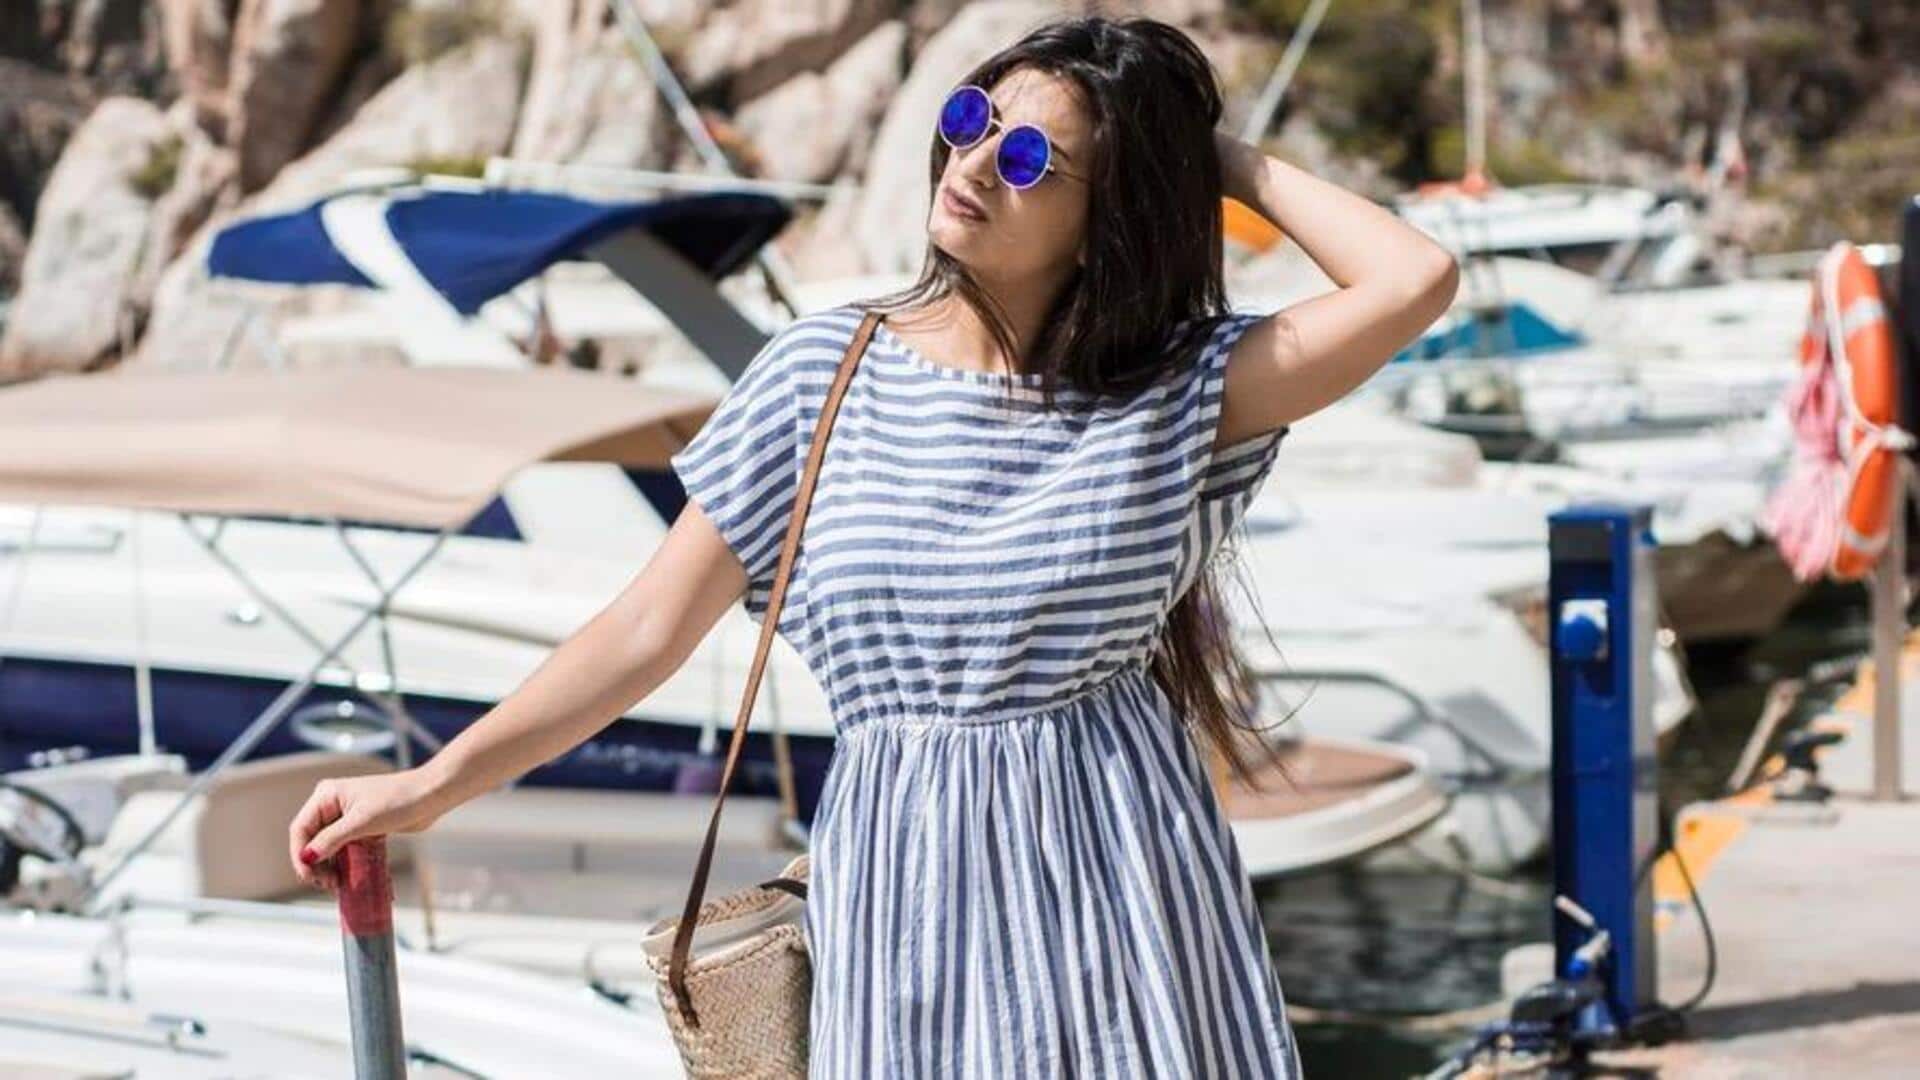 Nautical stripes make for timeless maritime chic: Here's how